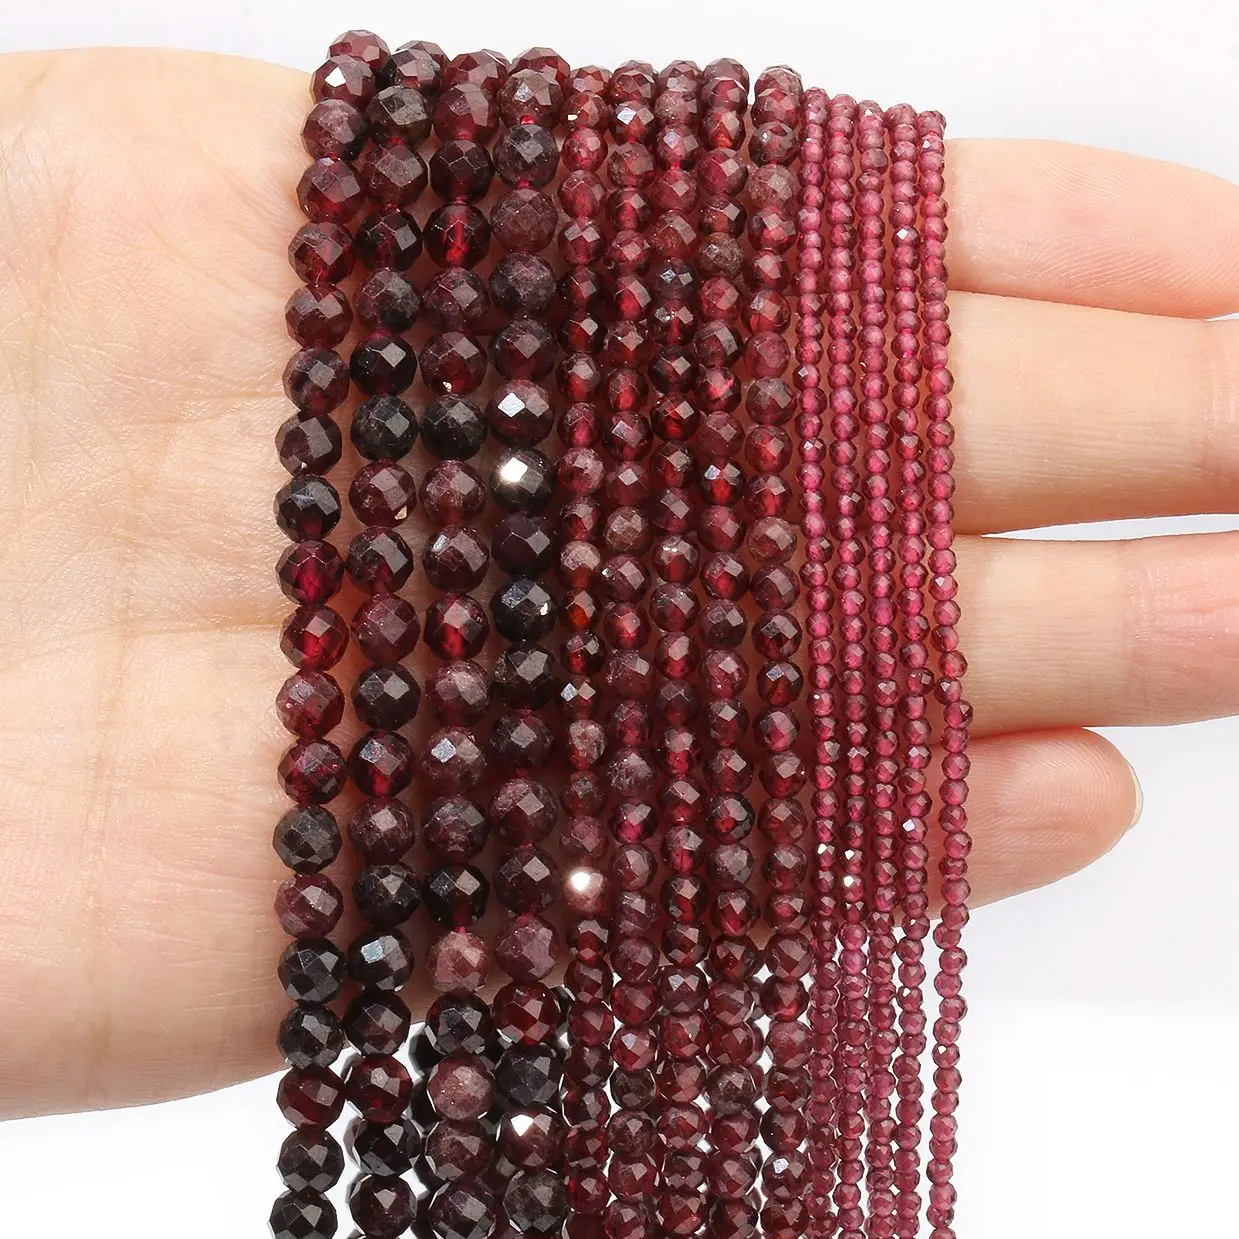 

Natural Garnet Tiny Beads Stone Beads Fasion Handmade Round Loose Spacer Fashion For Making DIY Beach Jewelry Accessories 2-4mm